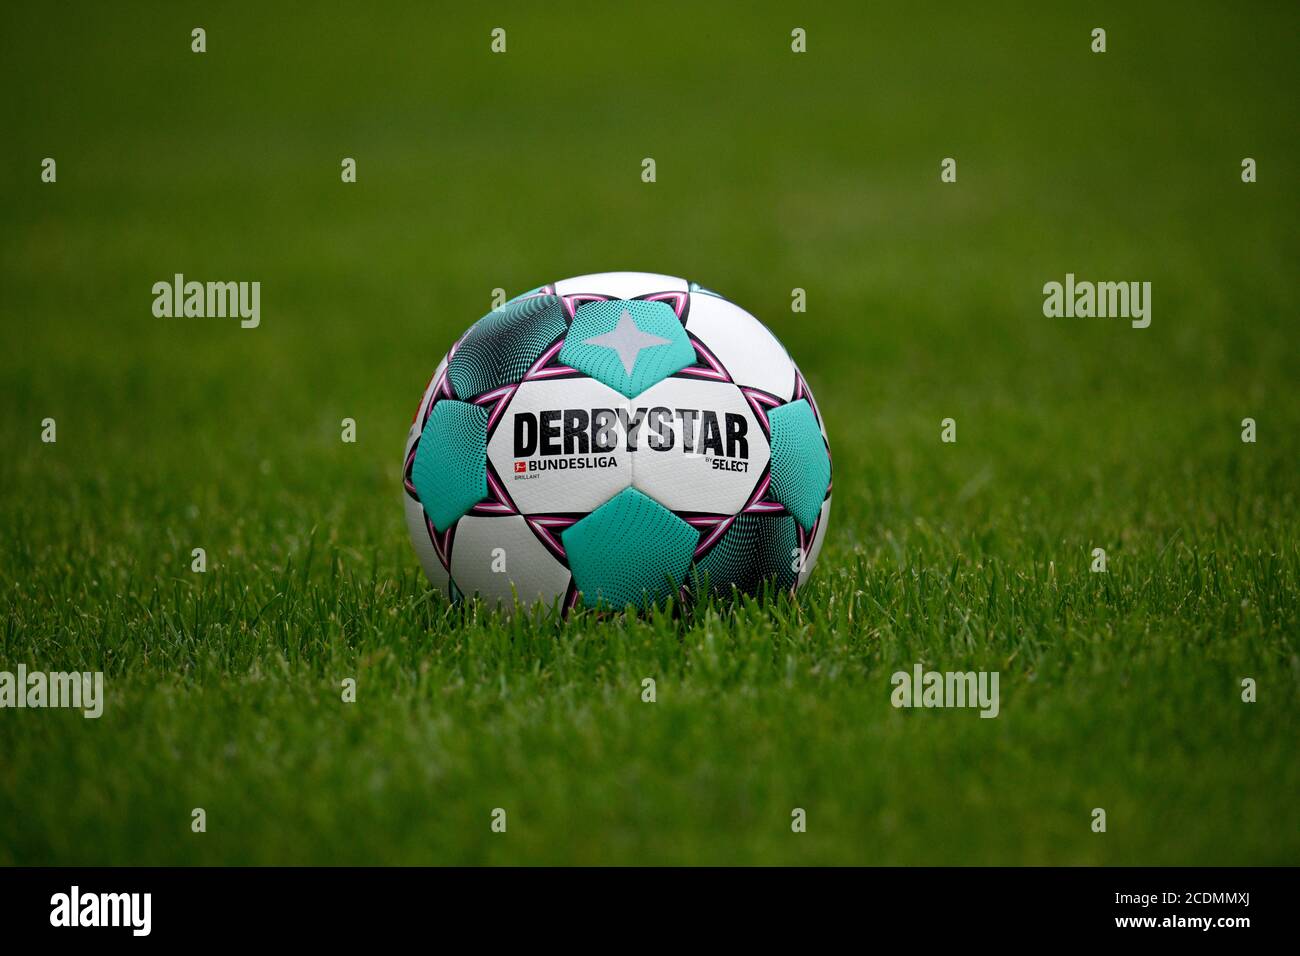 Adidas Derby star Brillant APS 20/21, match ball of the 2020/2021 Bundesliga season in turquoise and purple, lies on grass, Germany Stock Photo